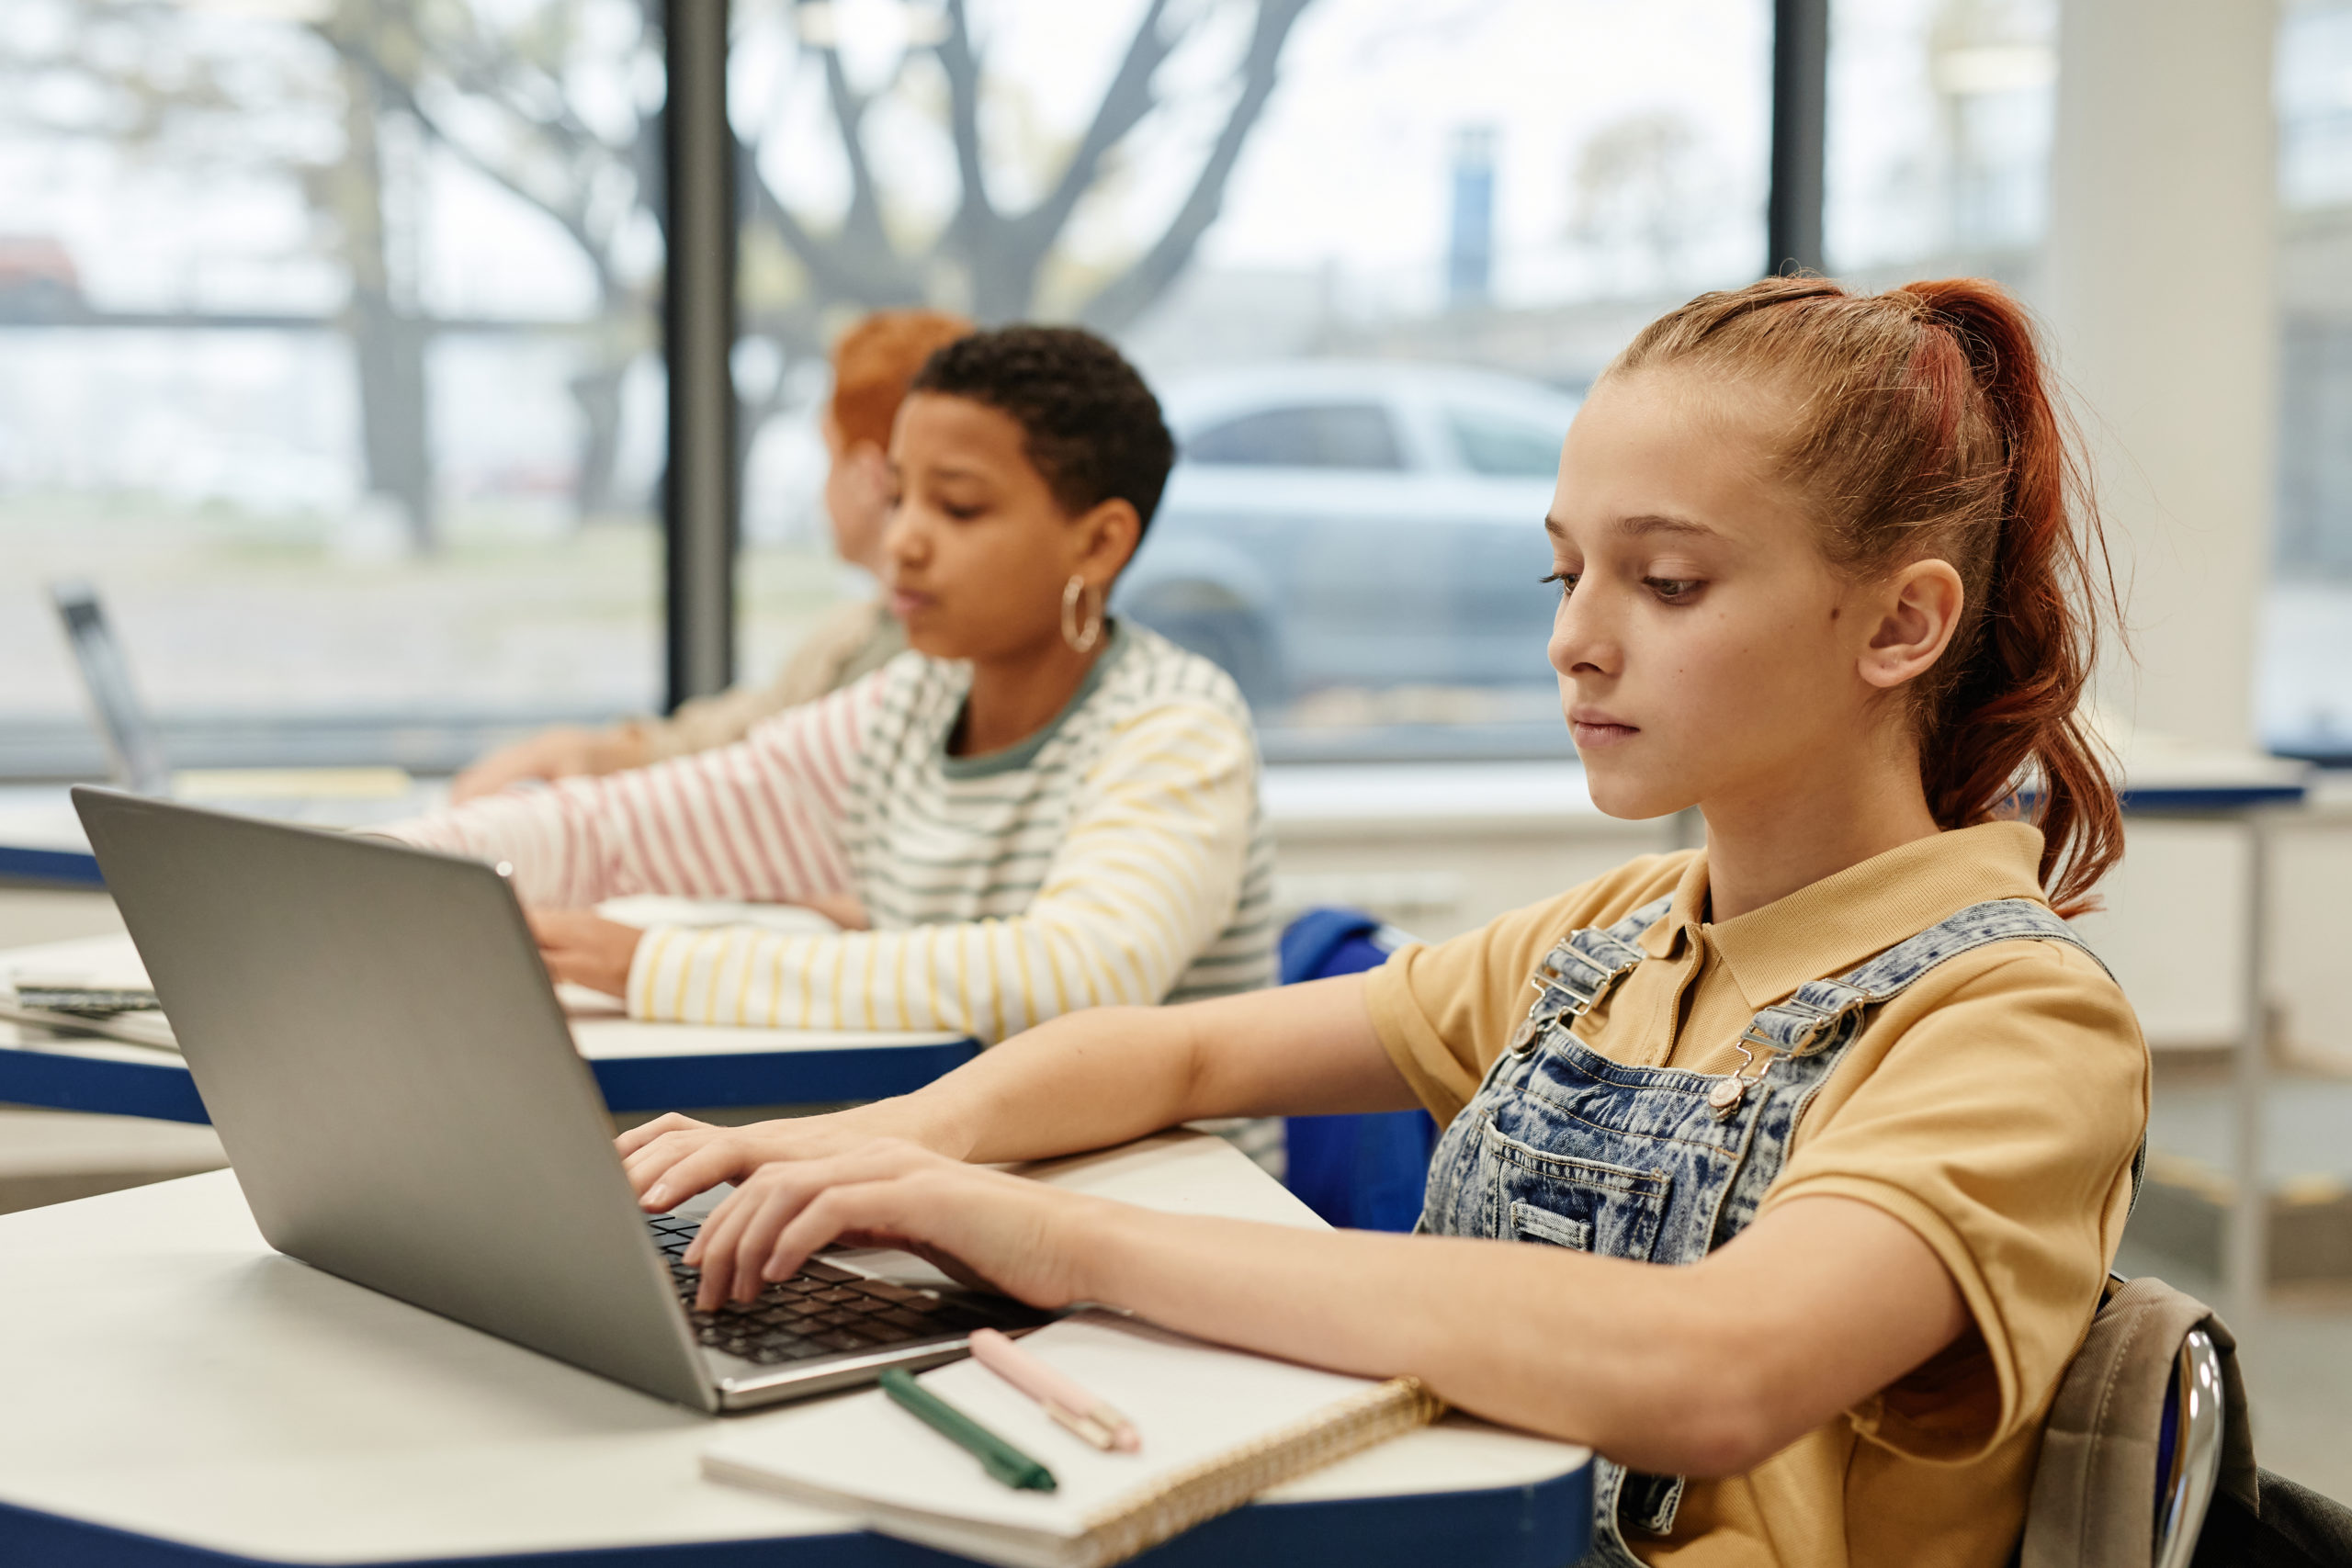 Featured post image of kids using a laptop in class to foster digital literacy